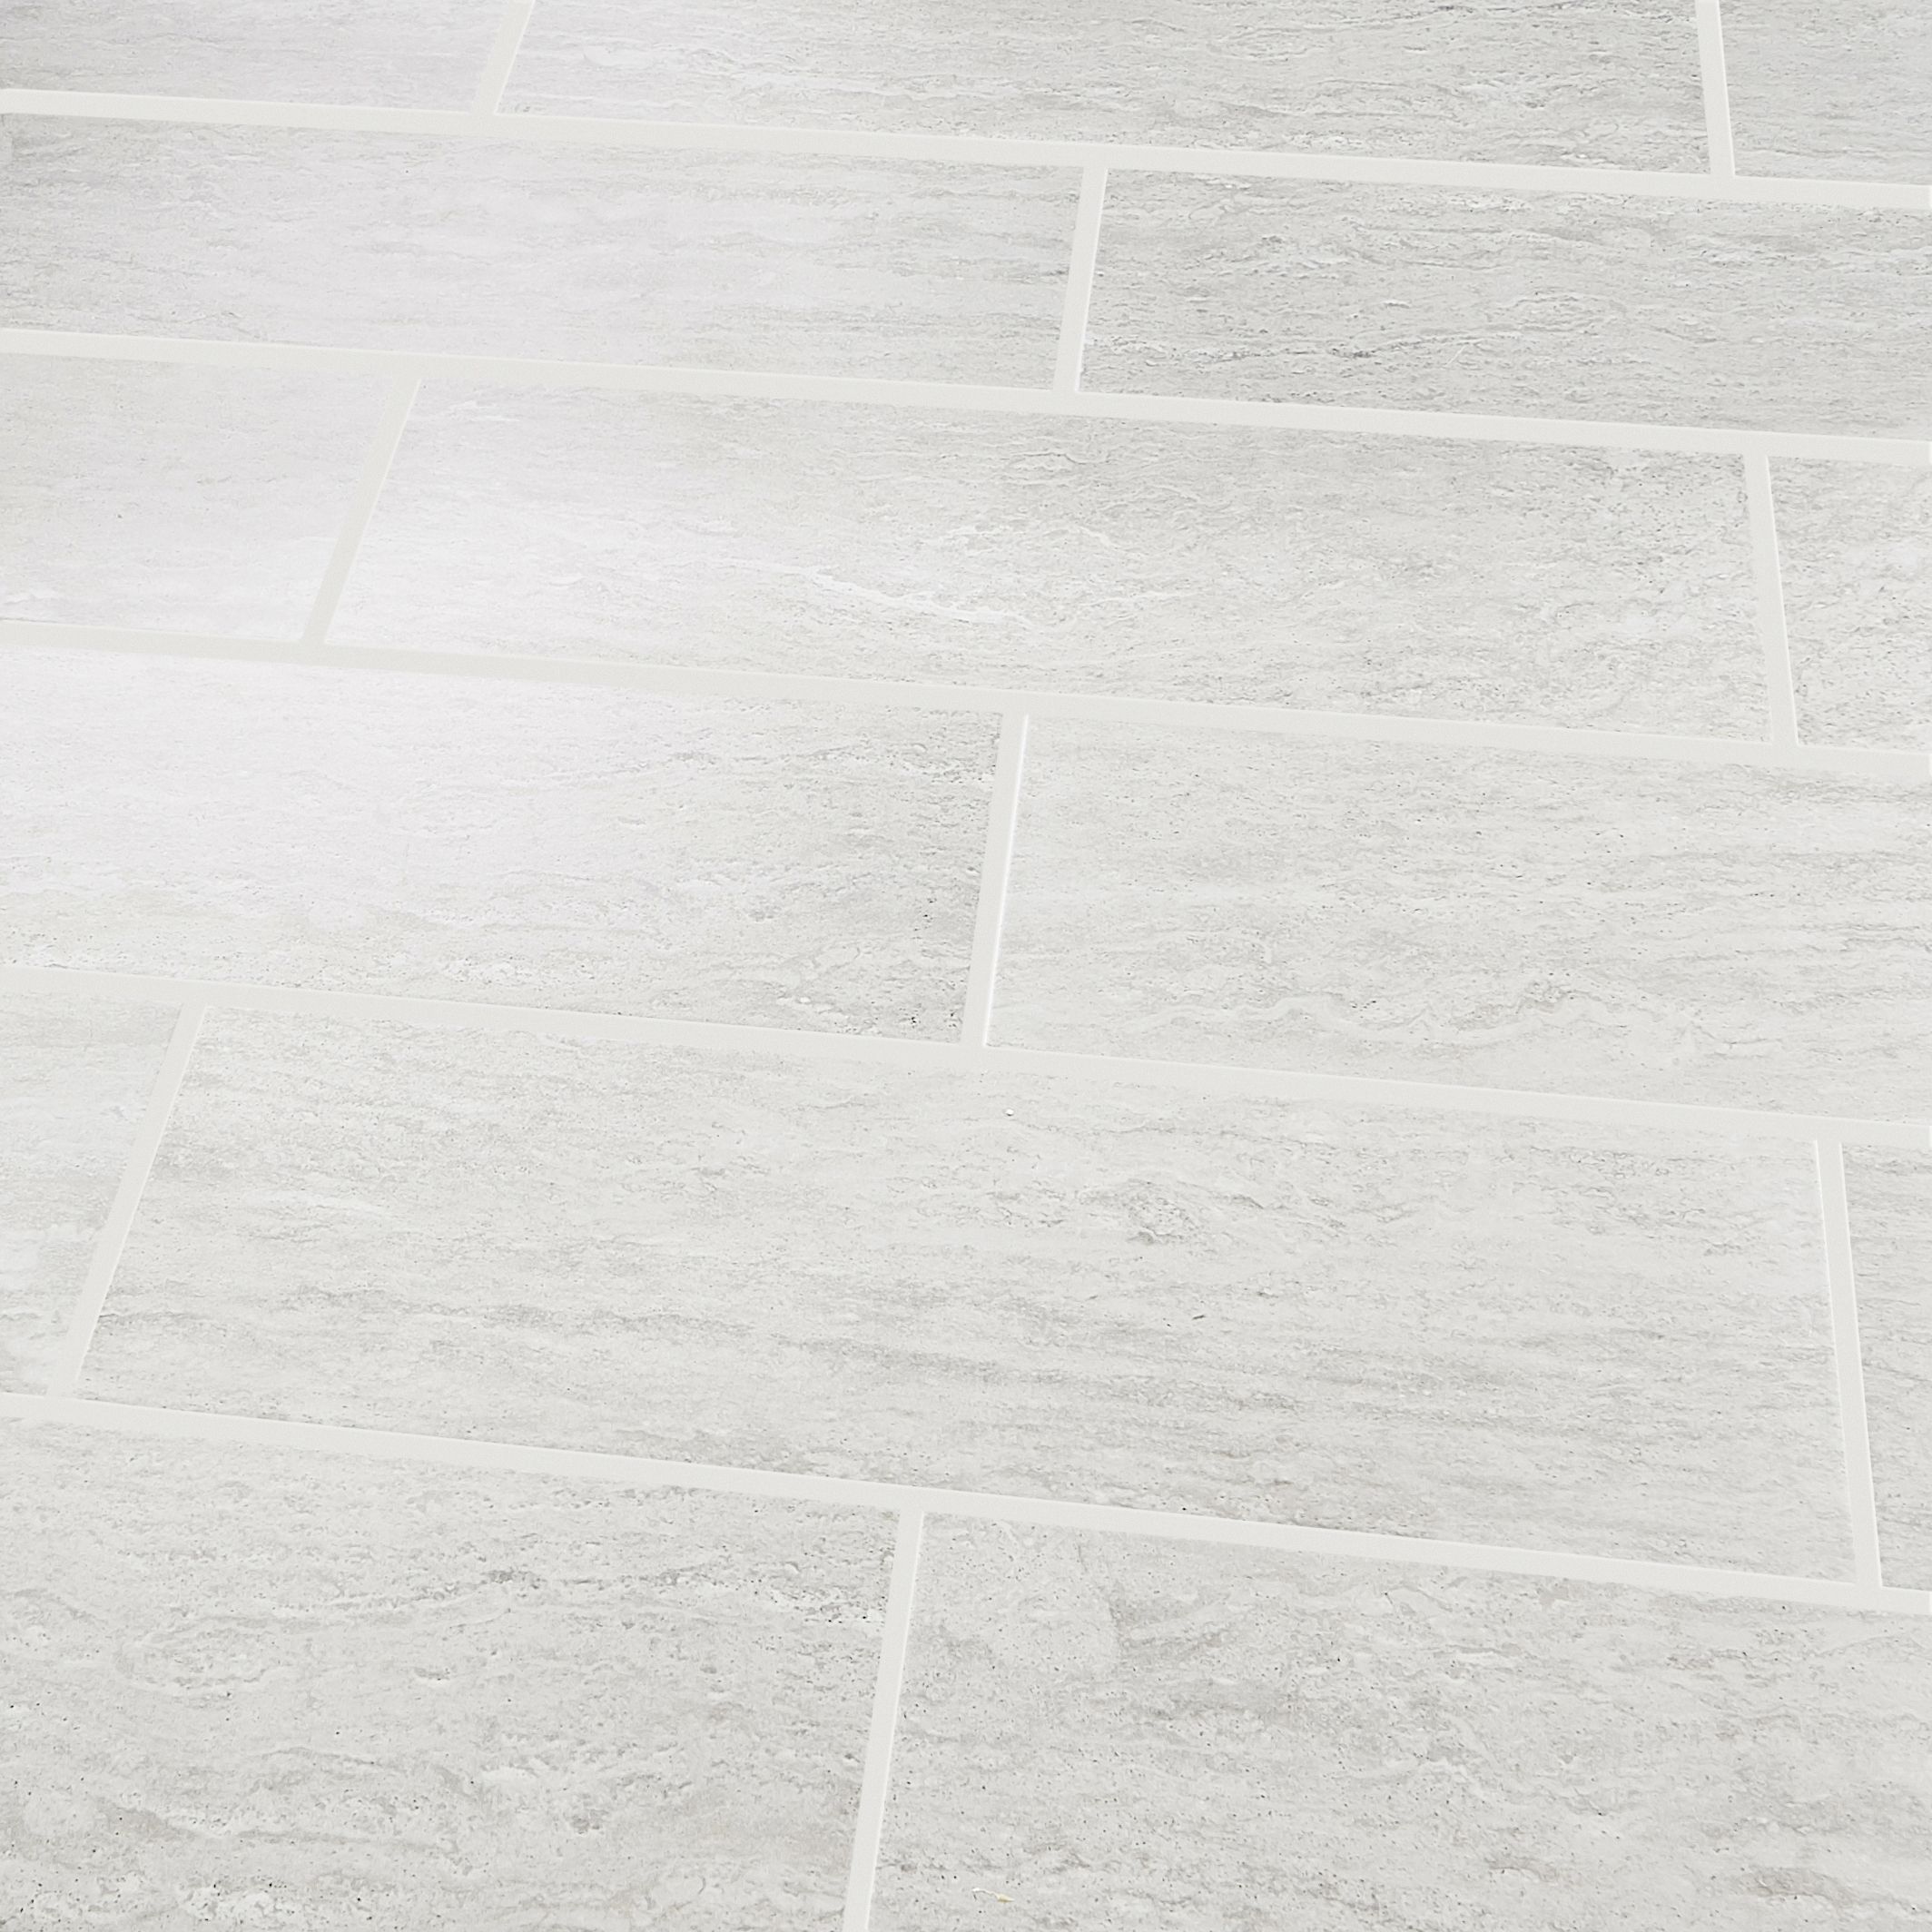 Seamless texture of luxury smooth concrete tiles in light grey and